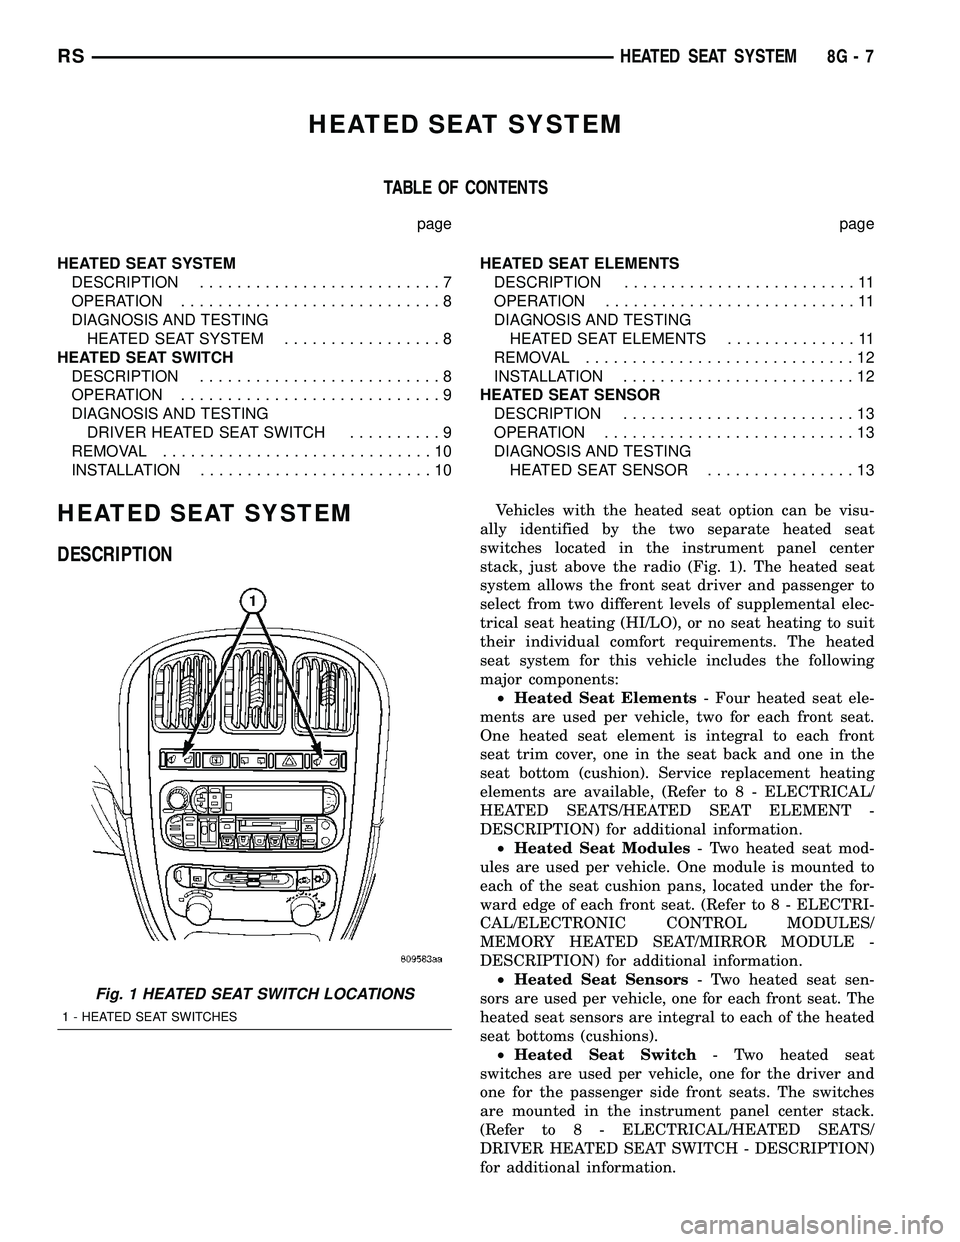 CHRYSLER CARAVAN 2005  Service Manual HEATED SEAT SYSTEM
TABLE OF CONTENTS
page page
HEATED SEAT SYSTEM
DESCRIPTION..........................7
OPERATION............................8
DIAGNOSIS AND TESTING
HEATED SEAT SYSTEM................